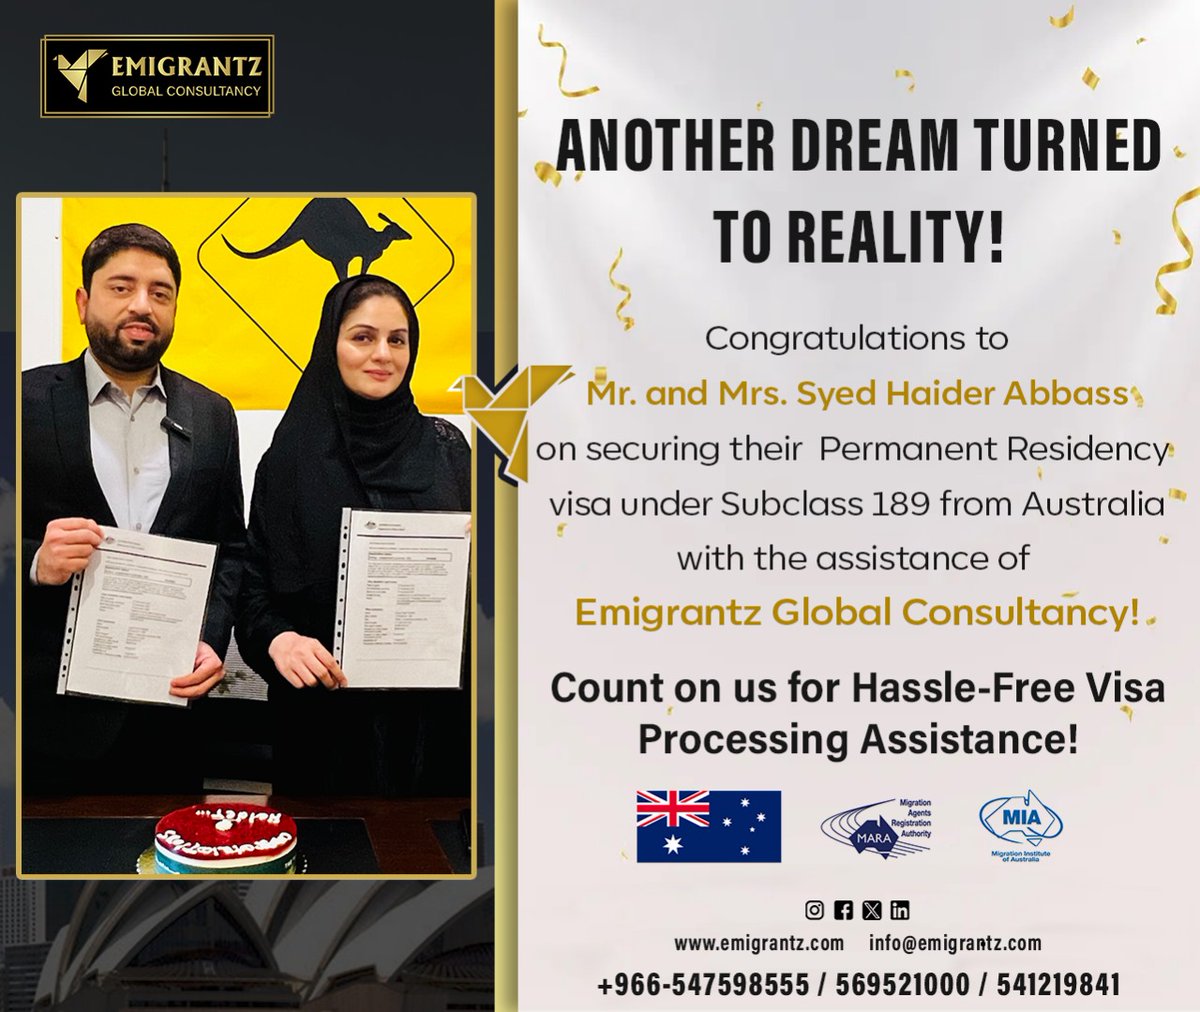 We are thrilled to share a moment of celebration with our wonderful client, Mr. and Mrs. Syed Haider Abbass who has successfully obtained approval of Permanent Residency visa under Subclass 189 from Australia!

#successstory #australia #canada #newzealand #workpermit #studypermit